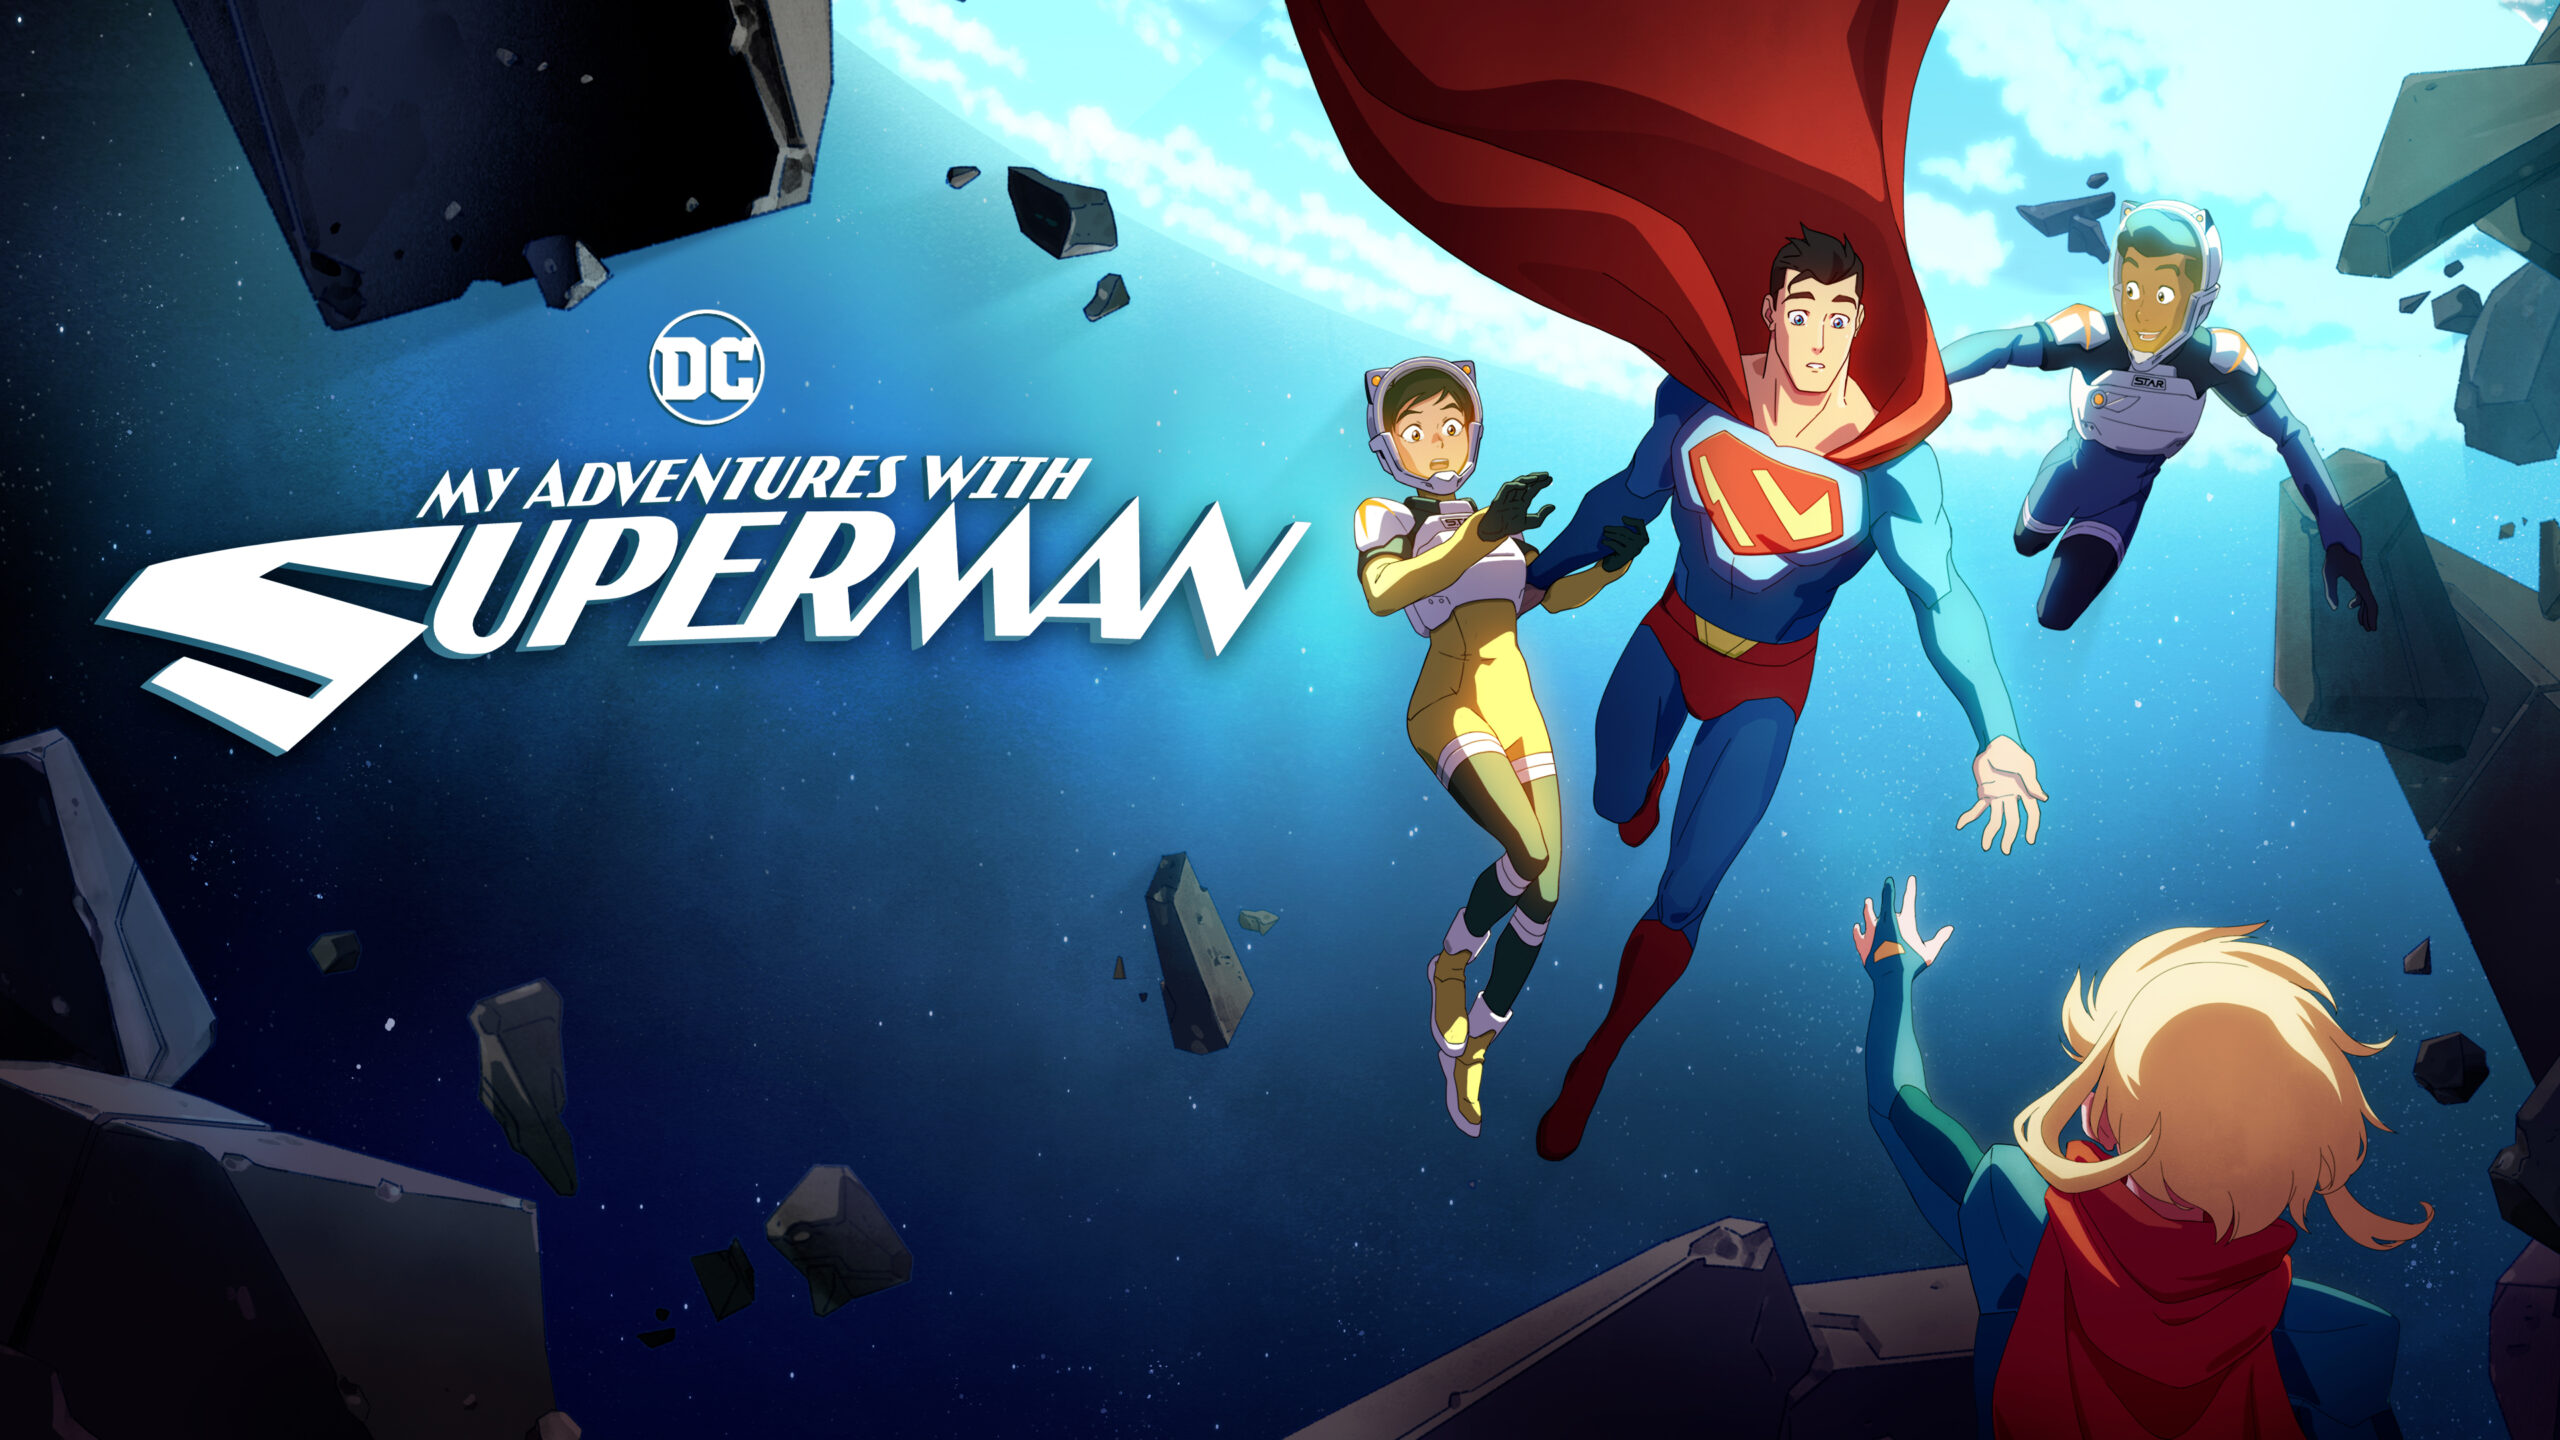 Official key art for Jake Wyatt, Brendan Clougher, and Josie Campbell's action-adventure animated series, My Adventures with Superman Season 2